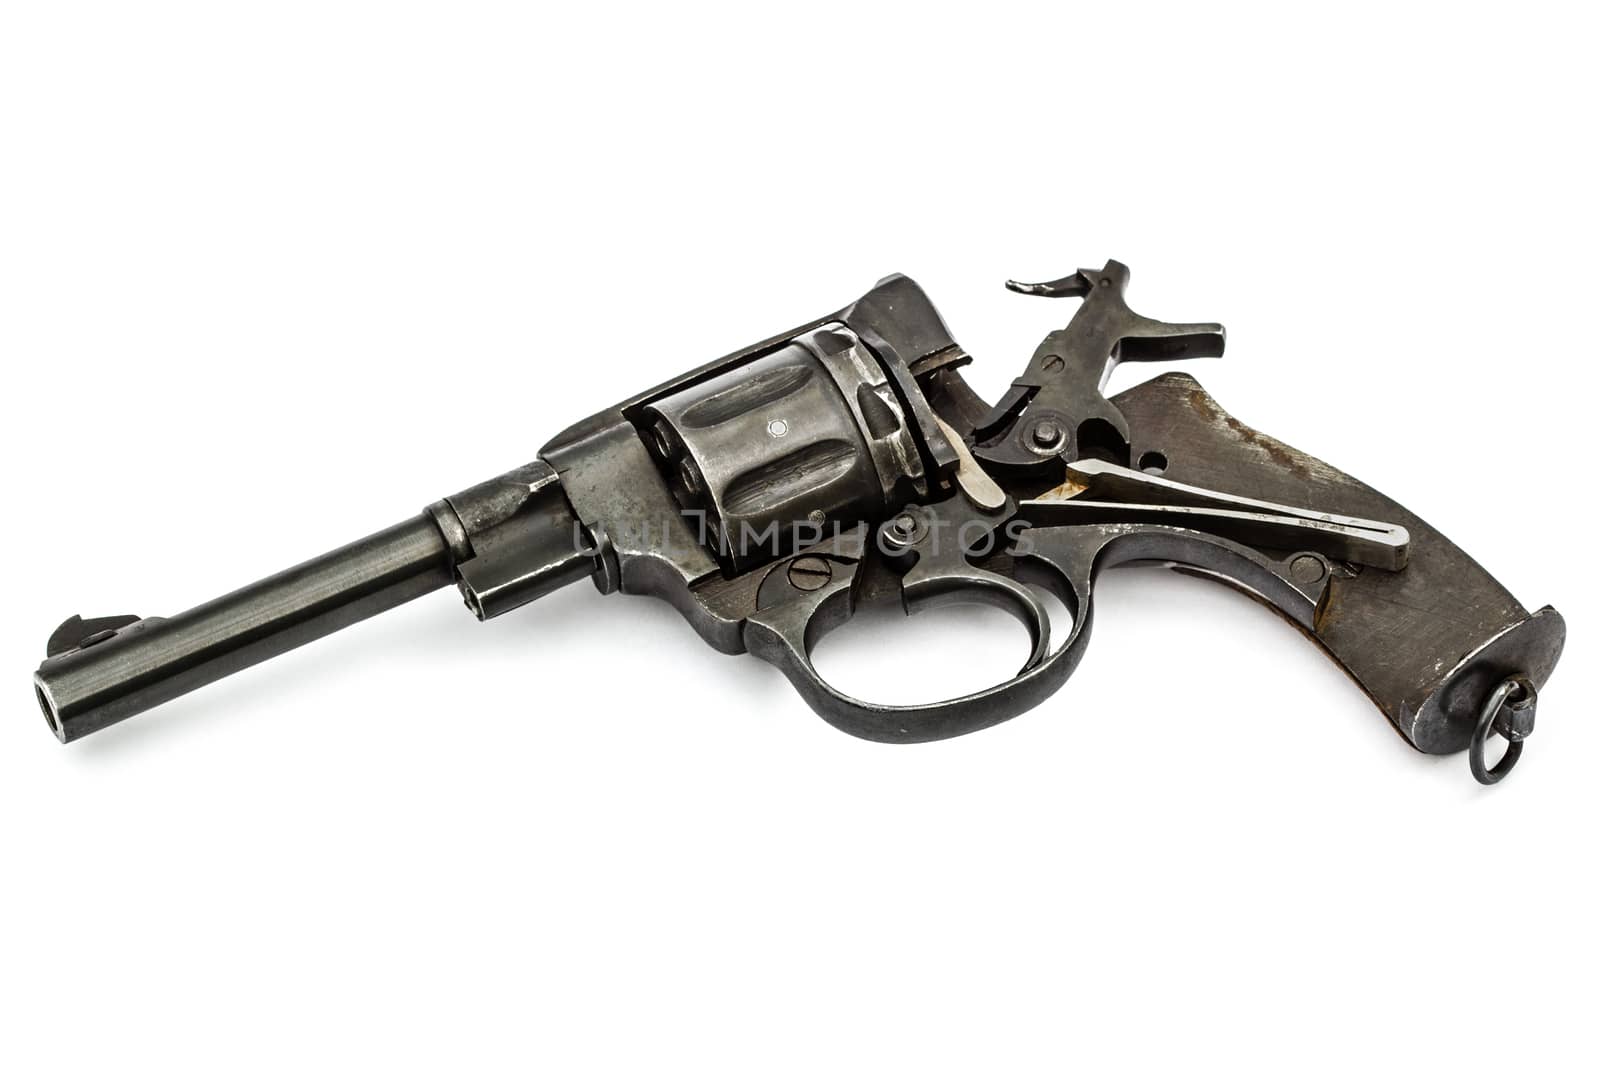 Disassembled revolver, pistol mechanism with the hammer cocked, isolated on white background